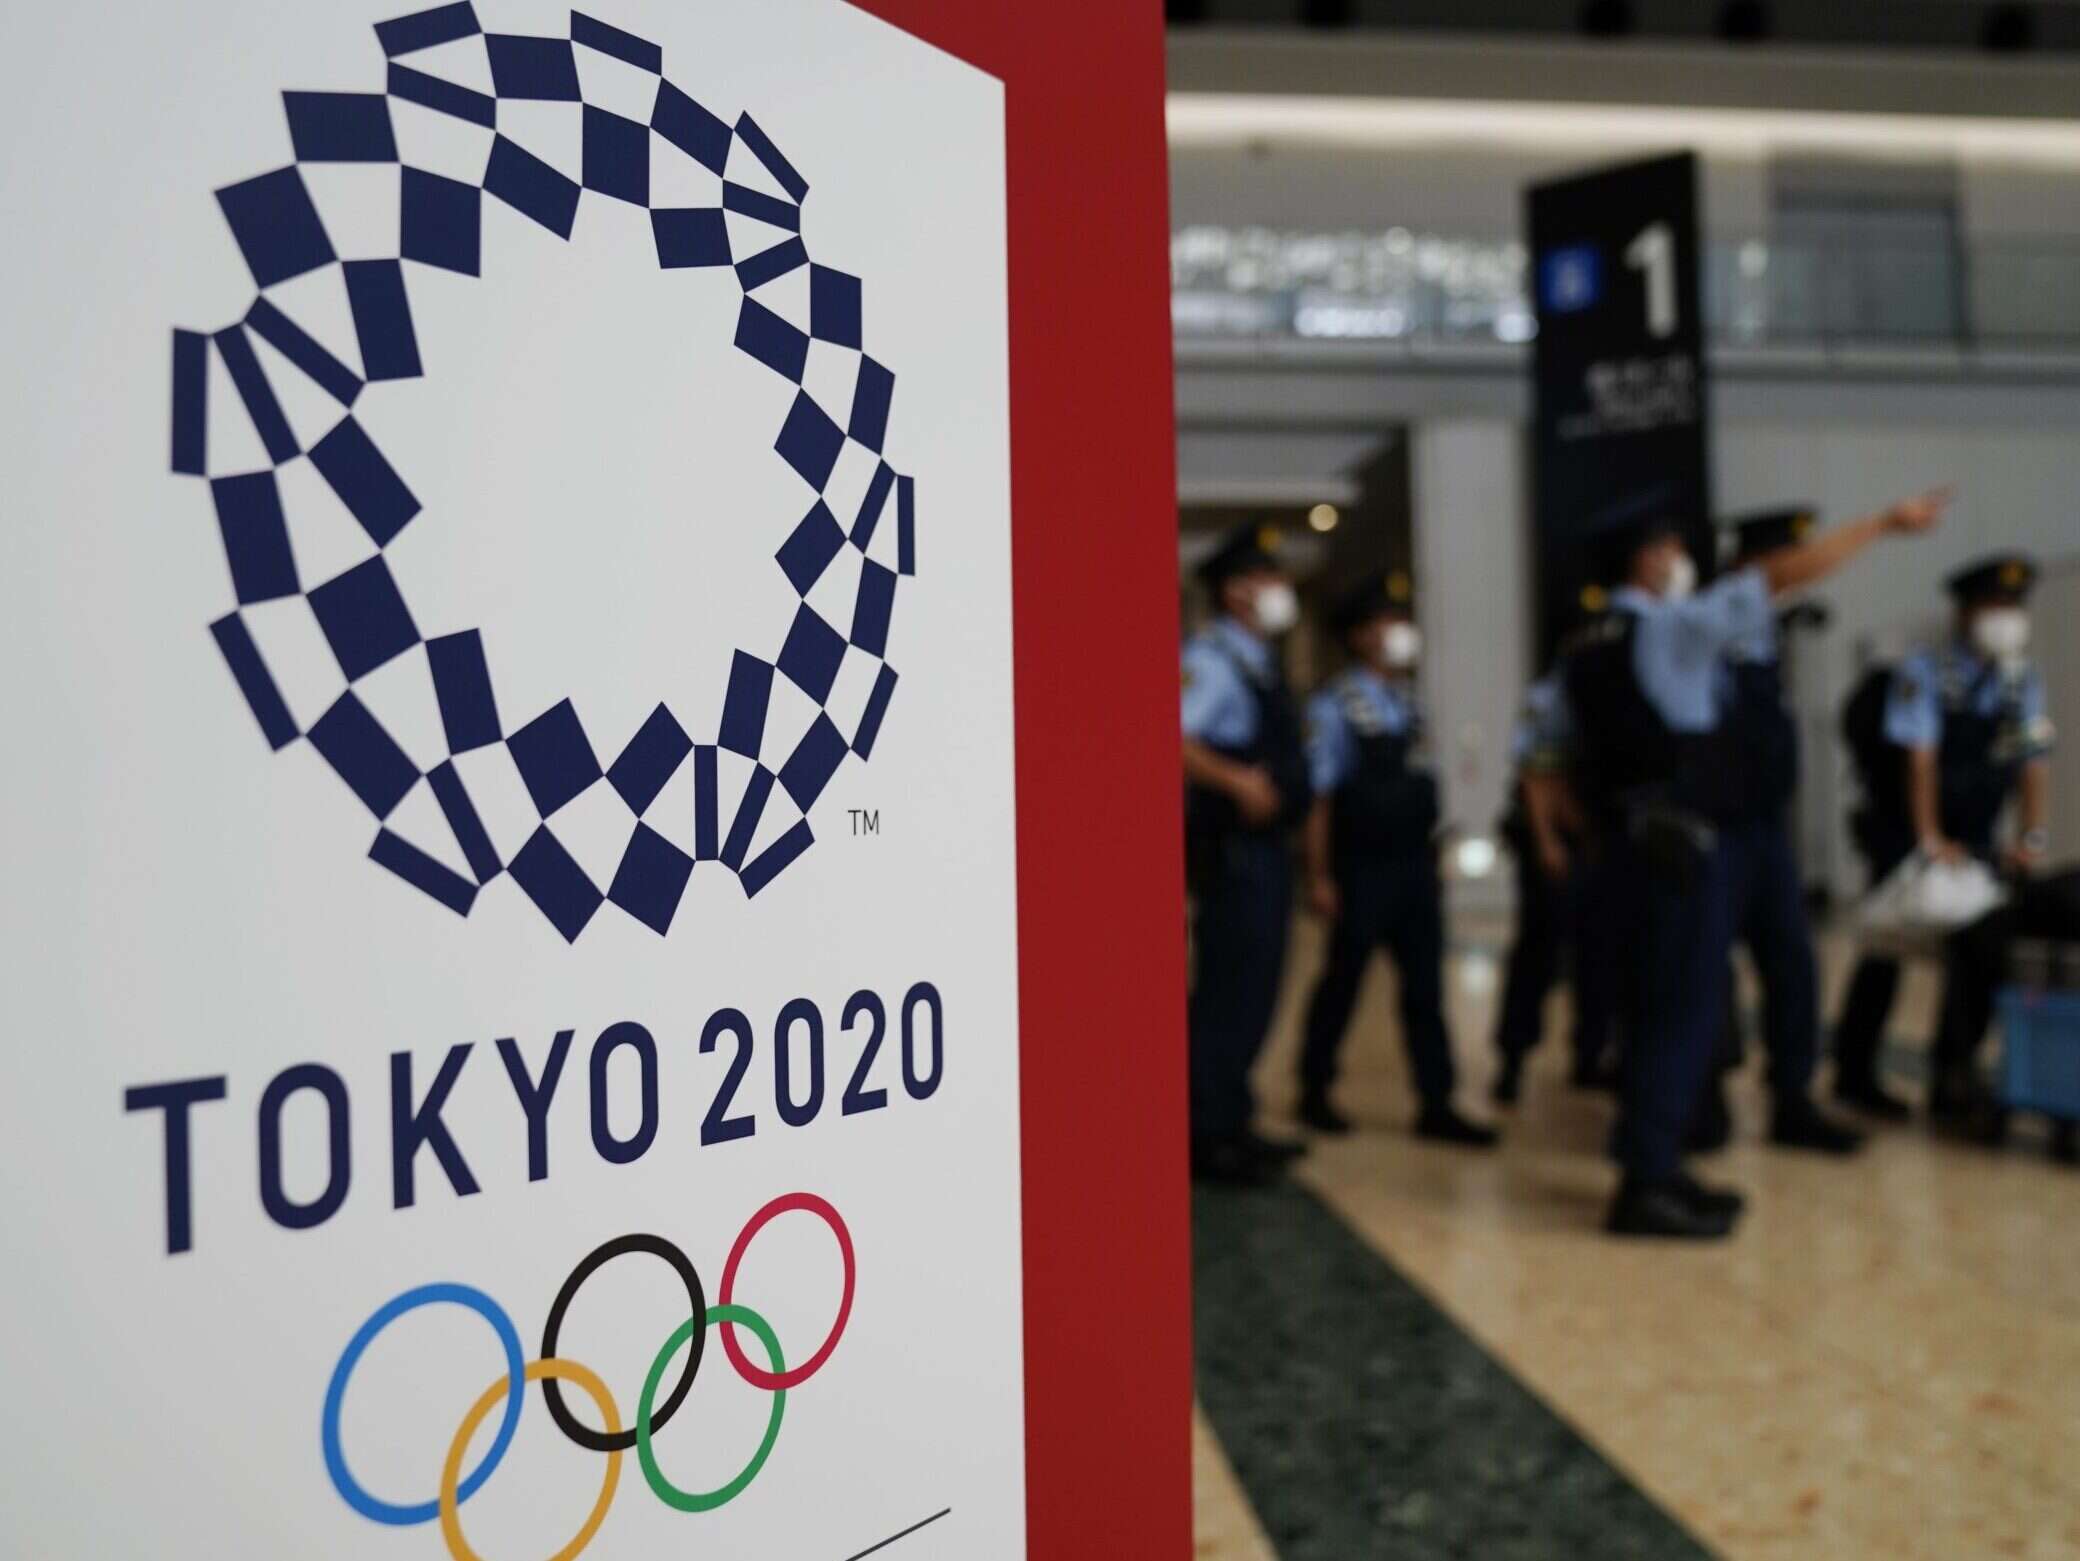 International journalists face 'sinister threats' to privacy at Tokyo Olympics